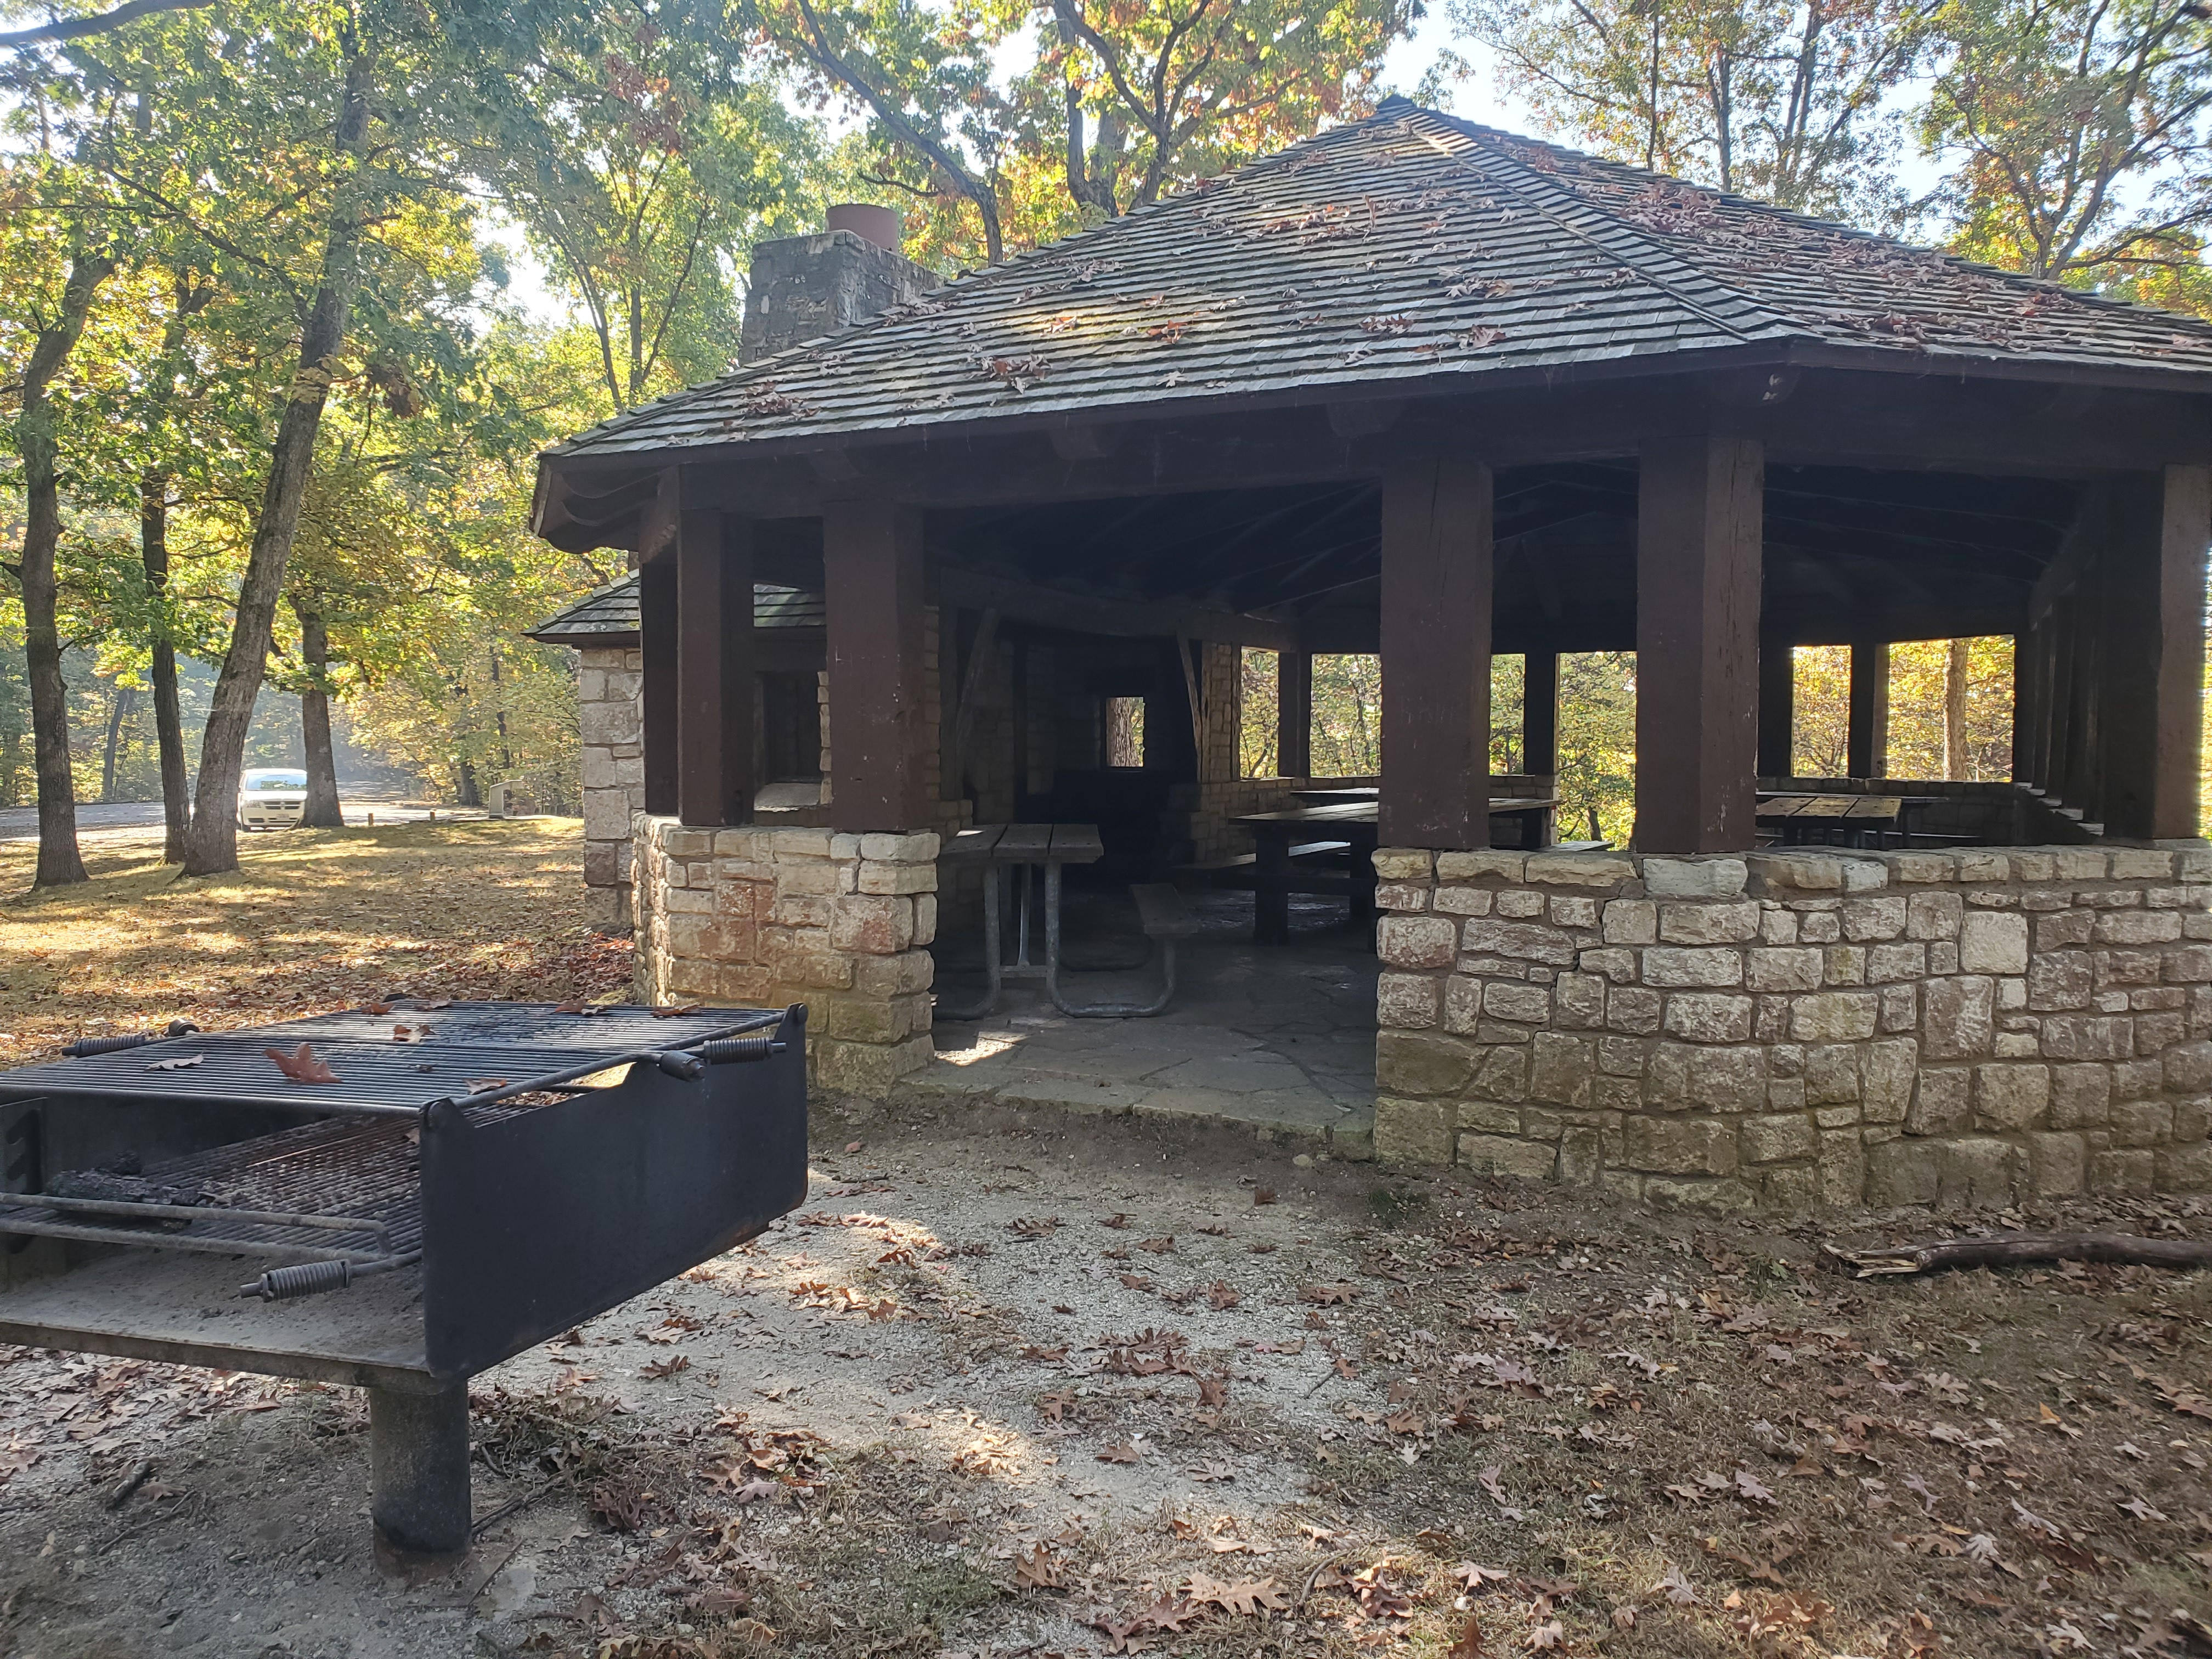 Grill in front of the rock and wood open shelter